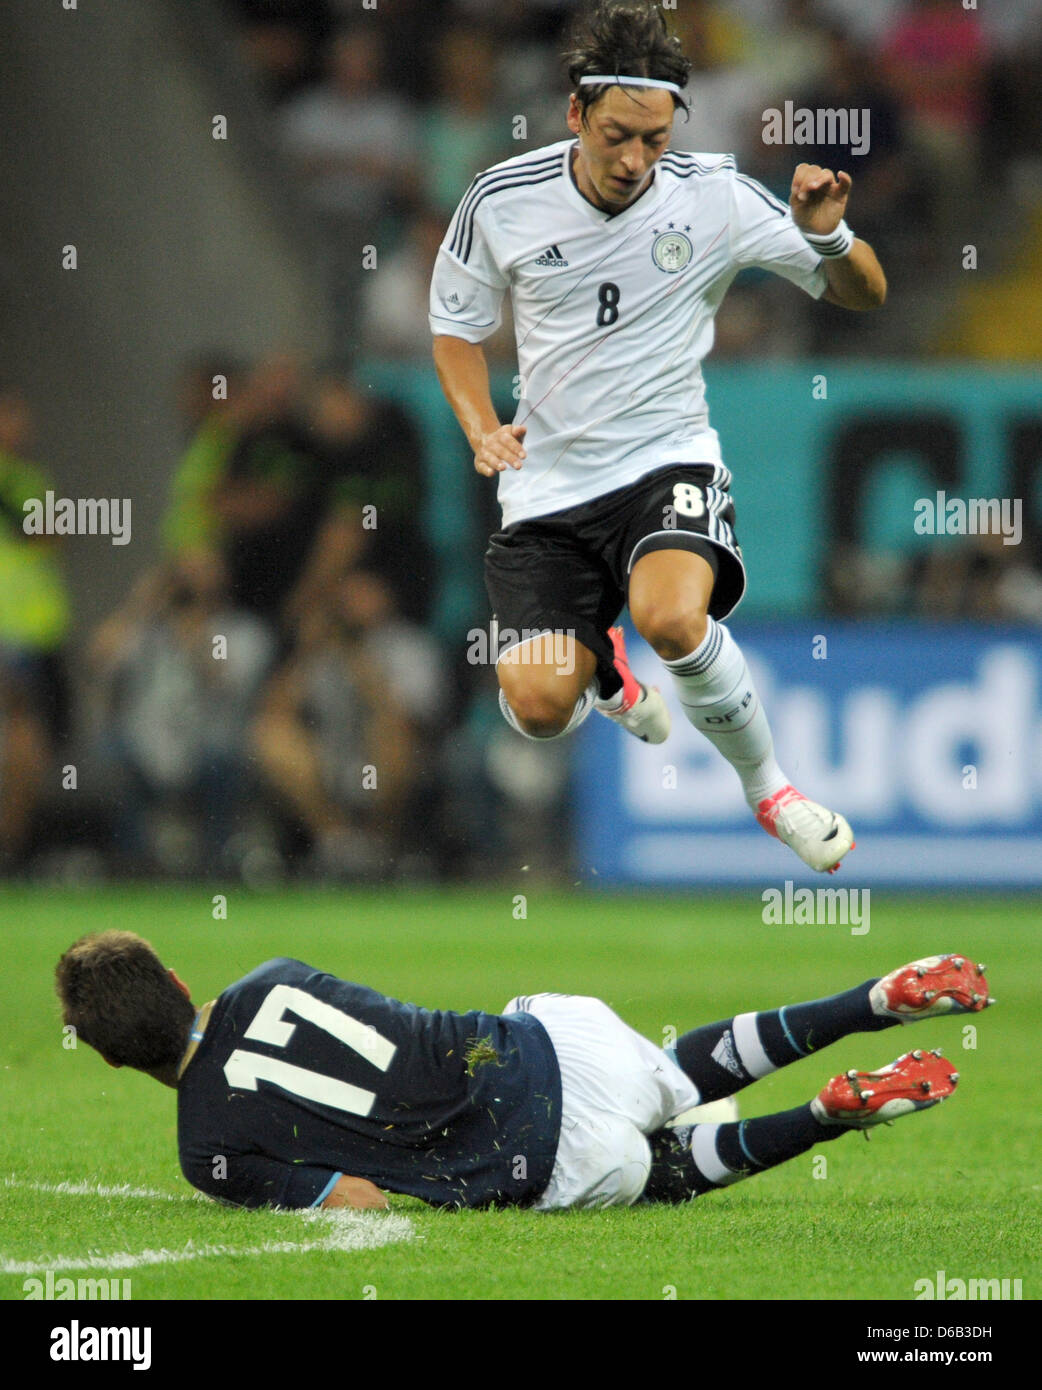 Germany's  Mesut Ozil jumps over Argentina's Federico Fernandez during the friendly soccer match between Germany and Argentina at the Commerzbank-Arena in Frankfurt/Main, Germany, 15 August 2012. Photo: Arne Dedert Stock Photo